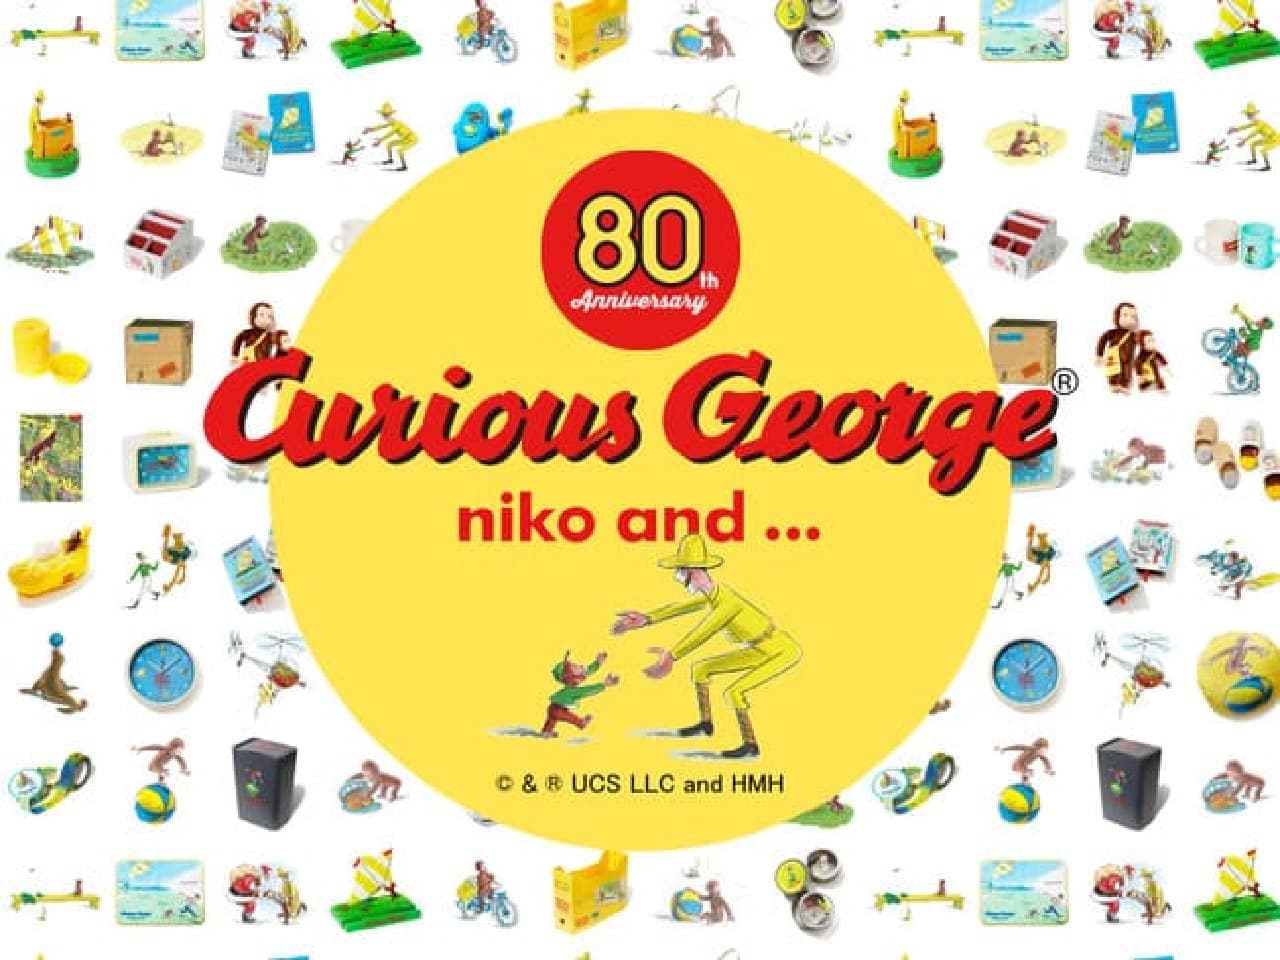 niko and ... × Curious George collaborates --Classic George's interior goods and stationery